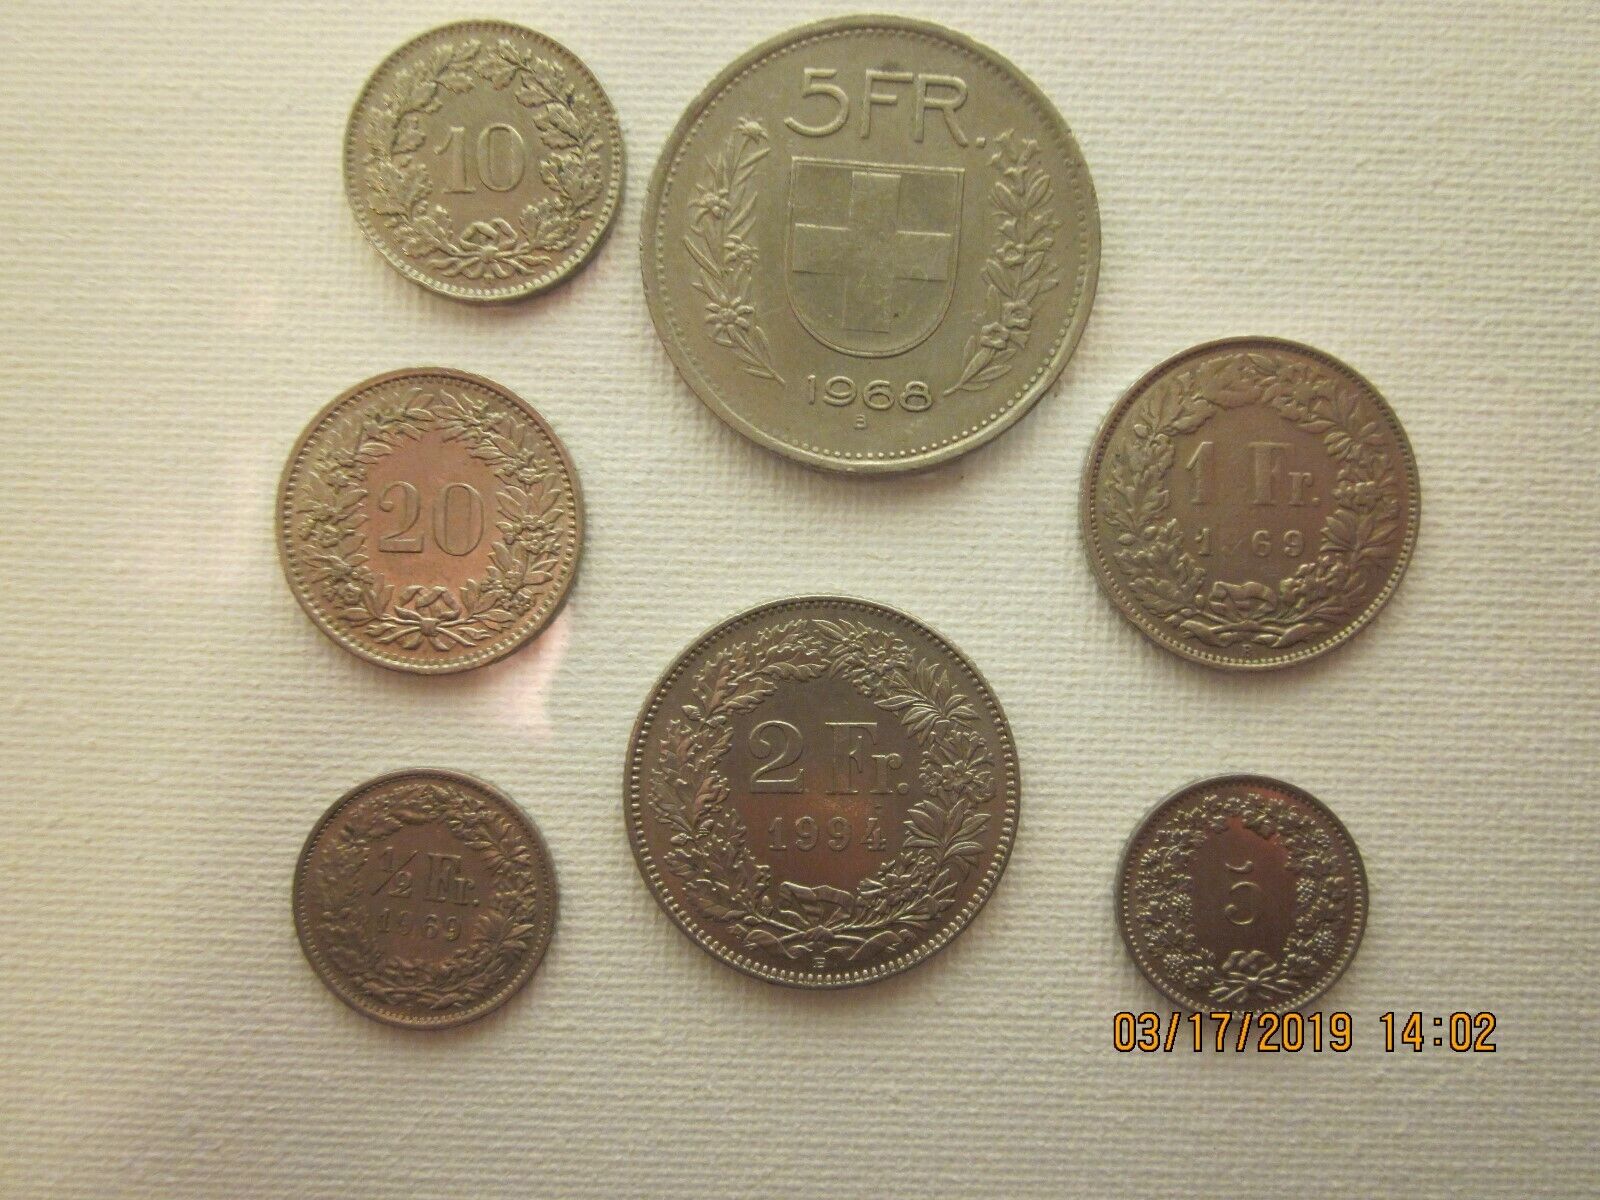  7 Swis Confoederatio Helvetica  coins ranging in date & Franc .  Great shape! Без бренда - фотография #2